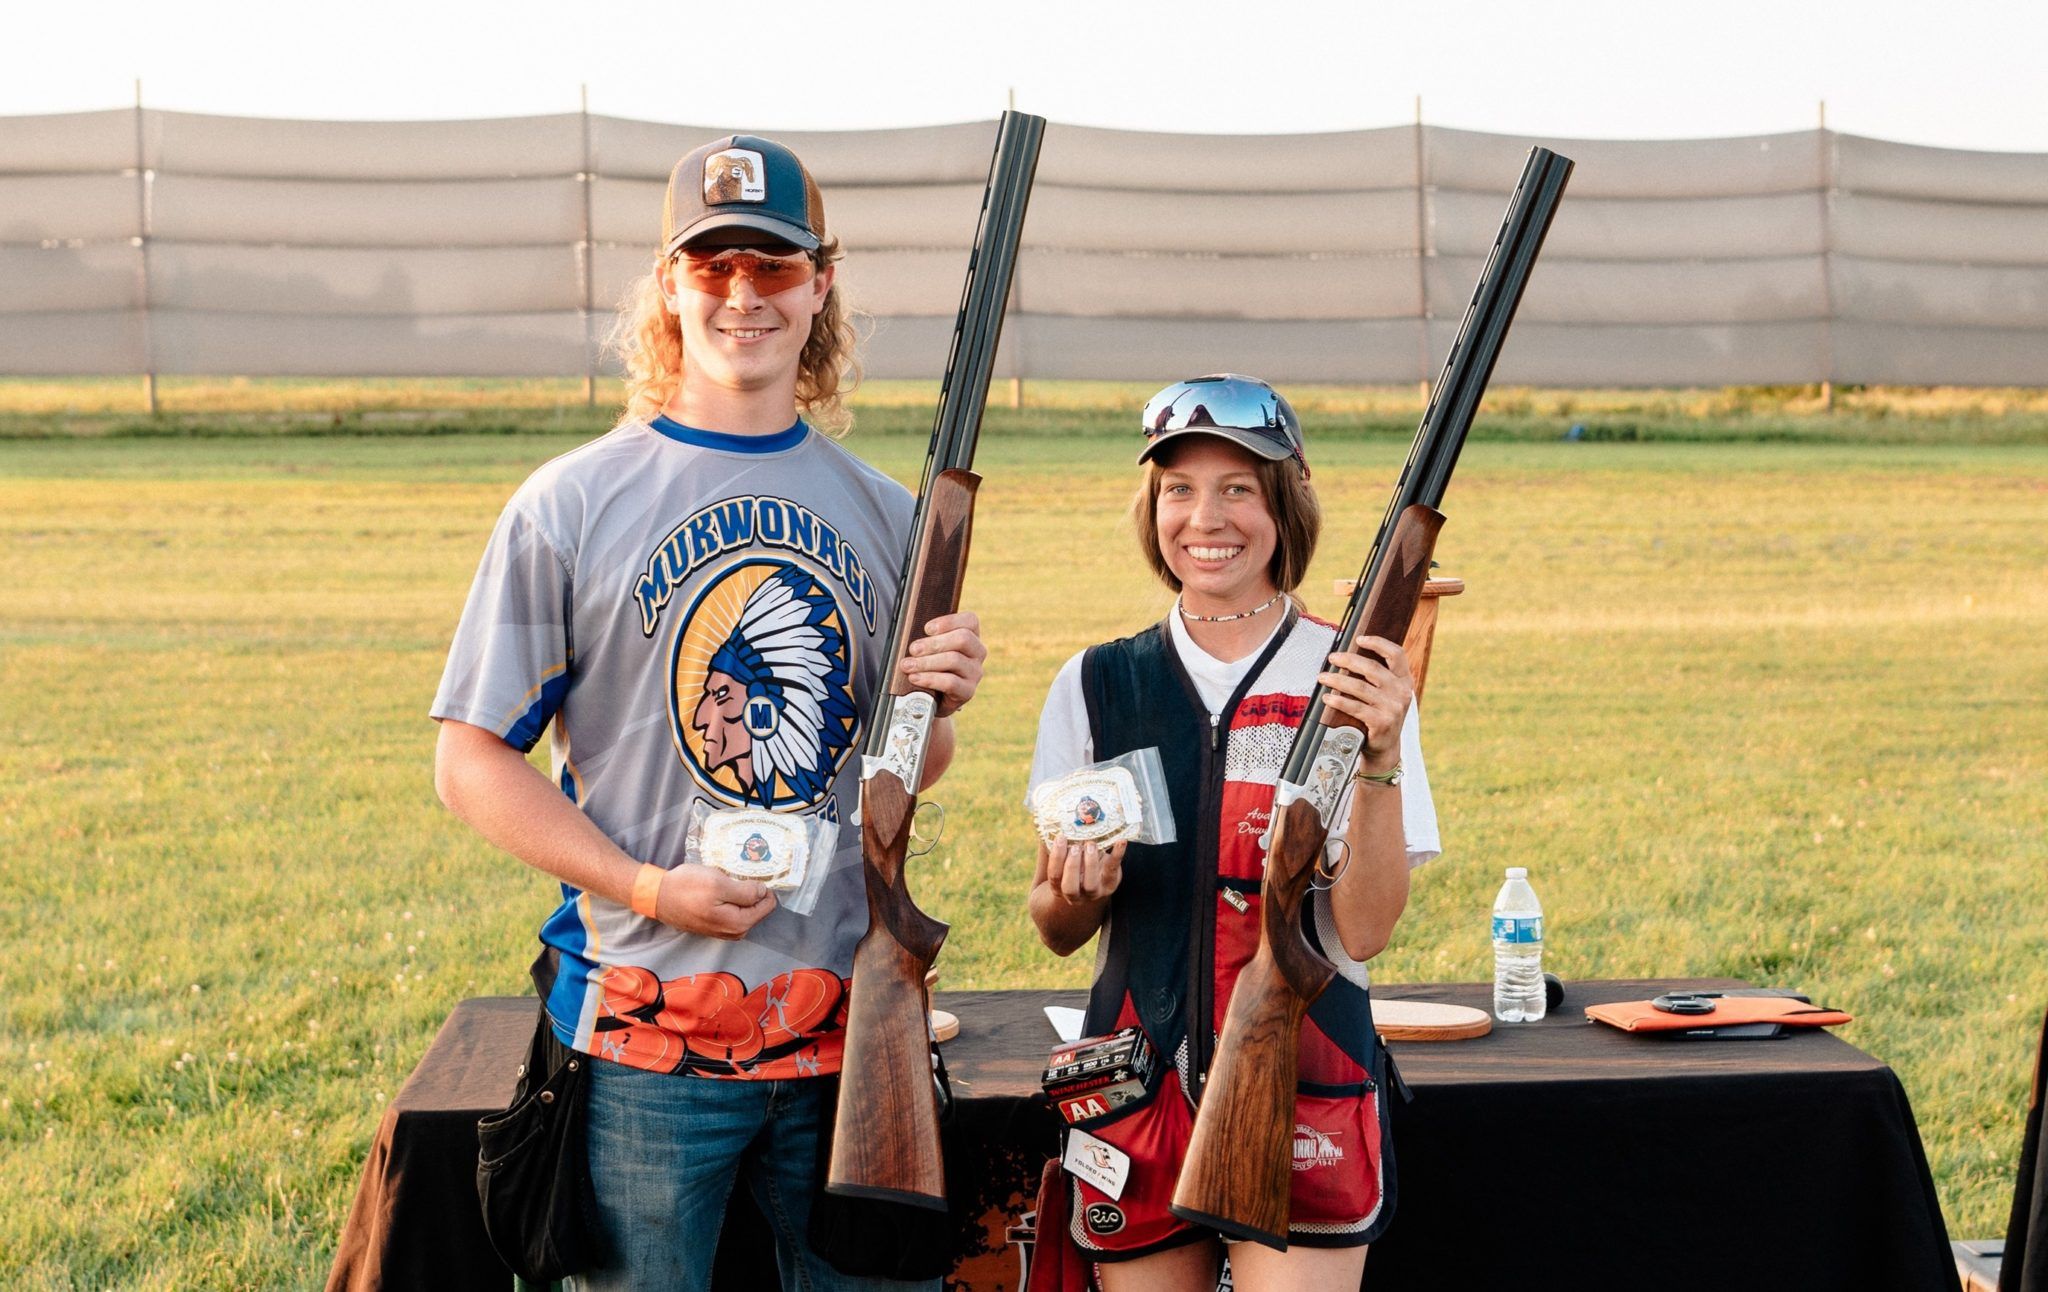 2022 SCTP National Championship Side Competitions & Scholarships